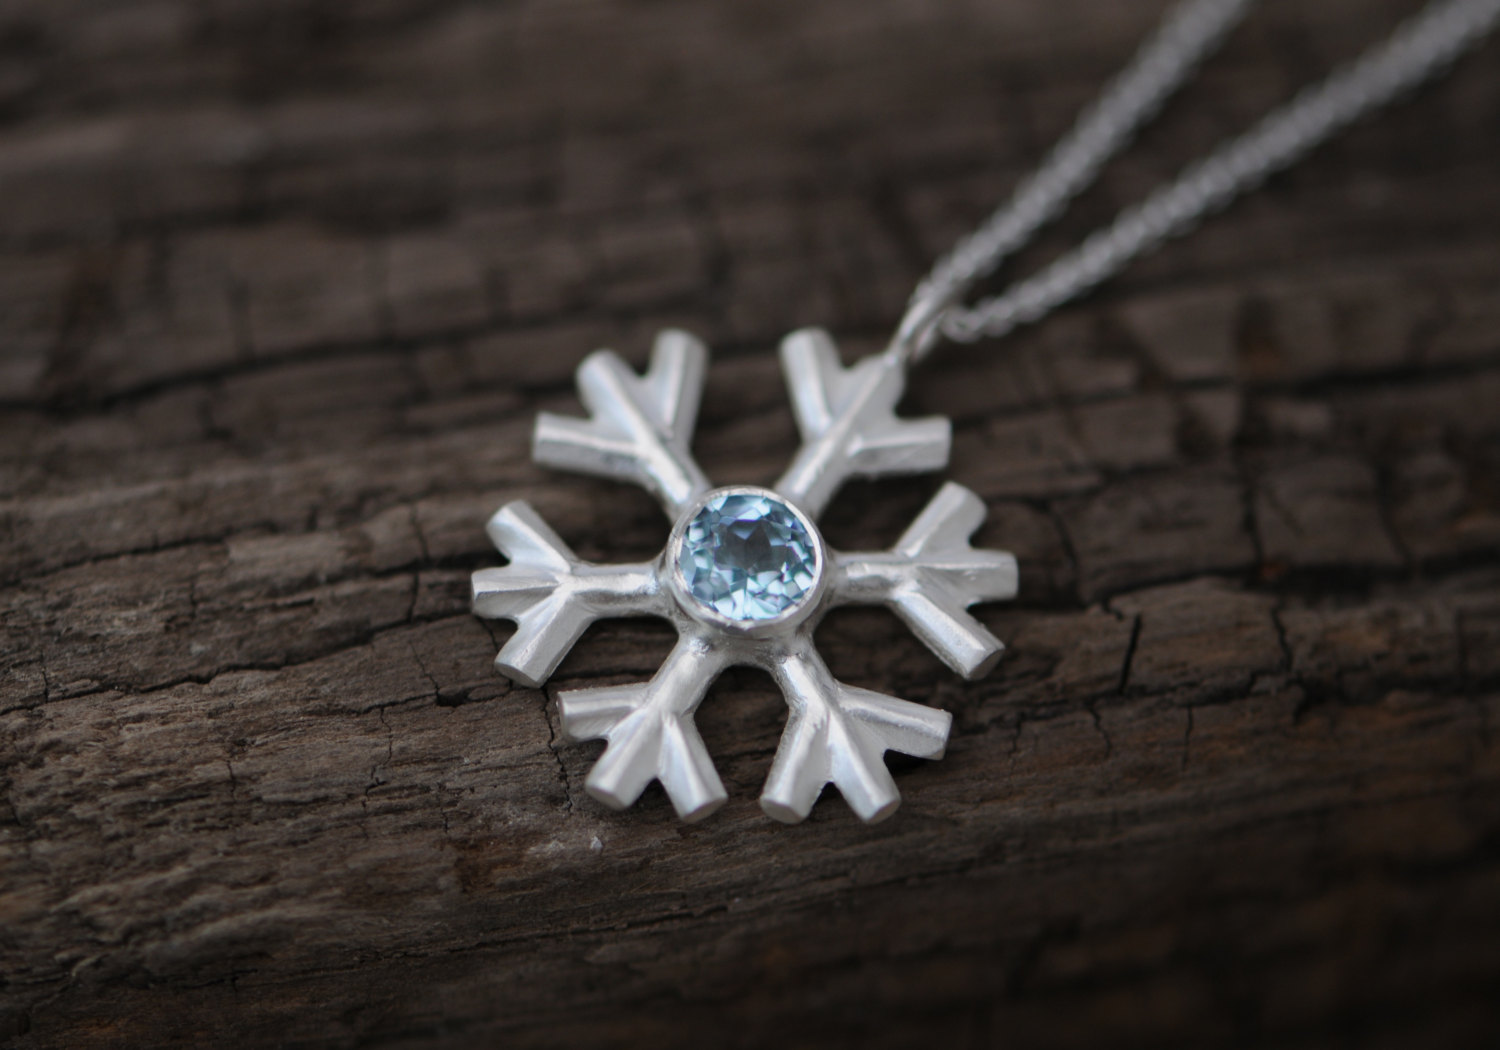 Lovely and sparkly aquamarine snowflake, set in sterling silver on a fine silver necklace, by William White